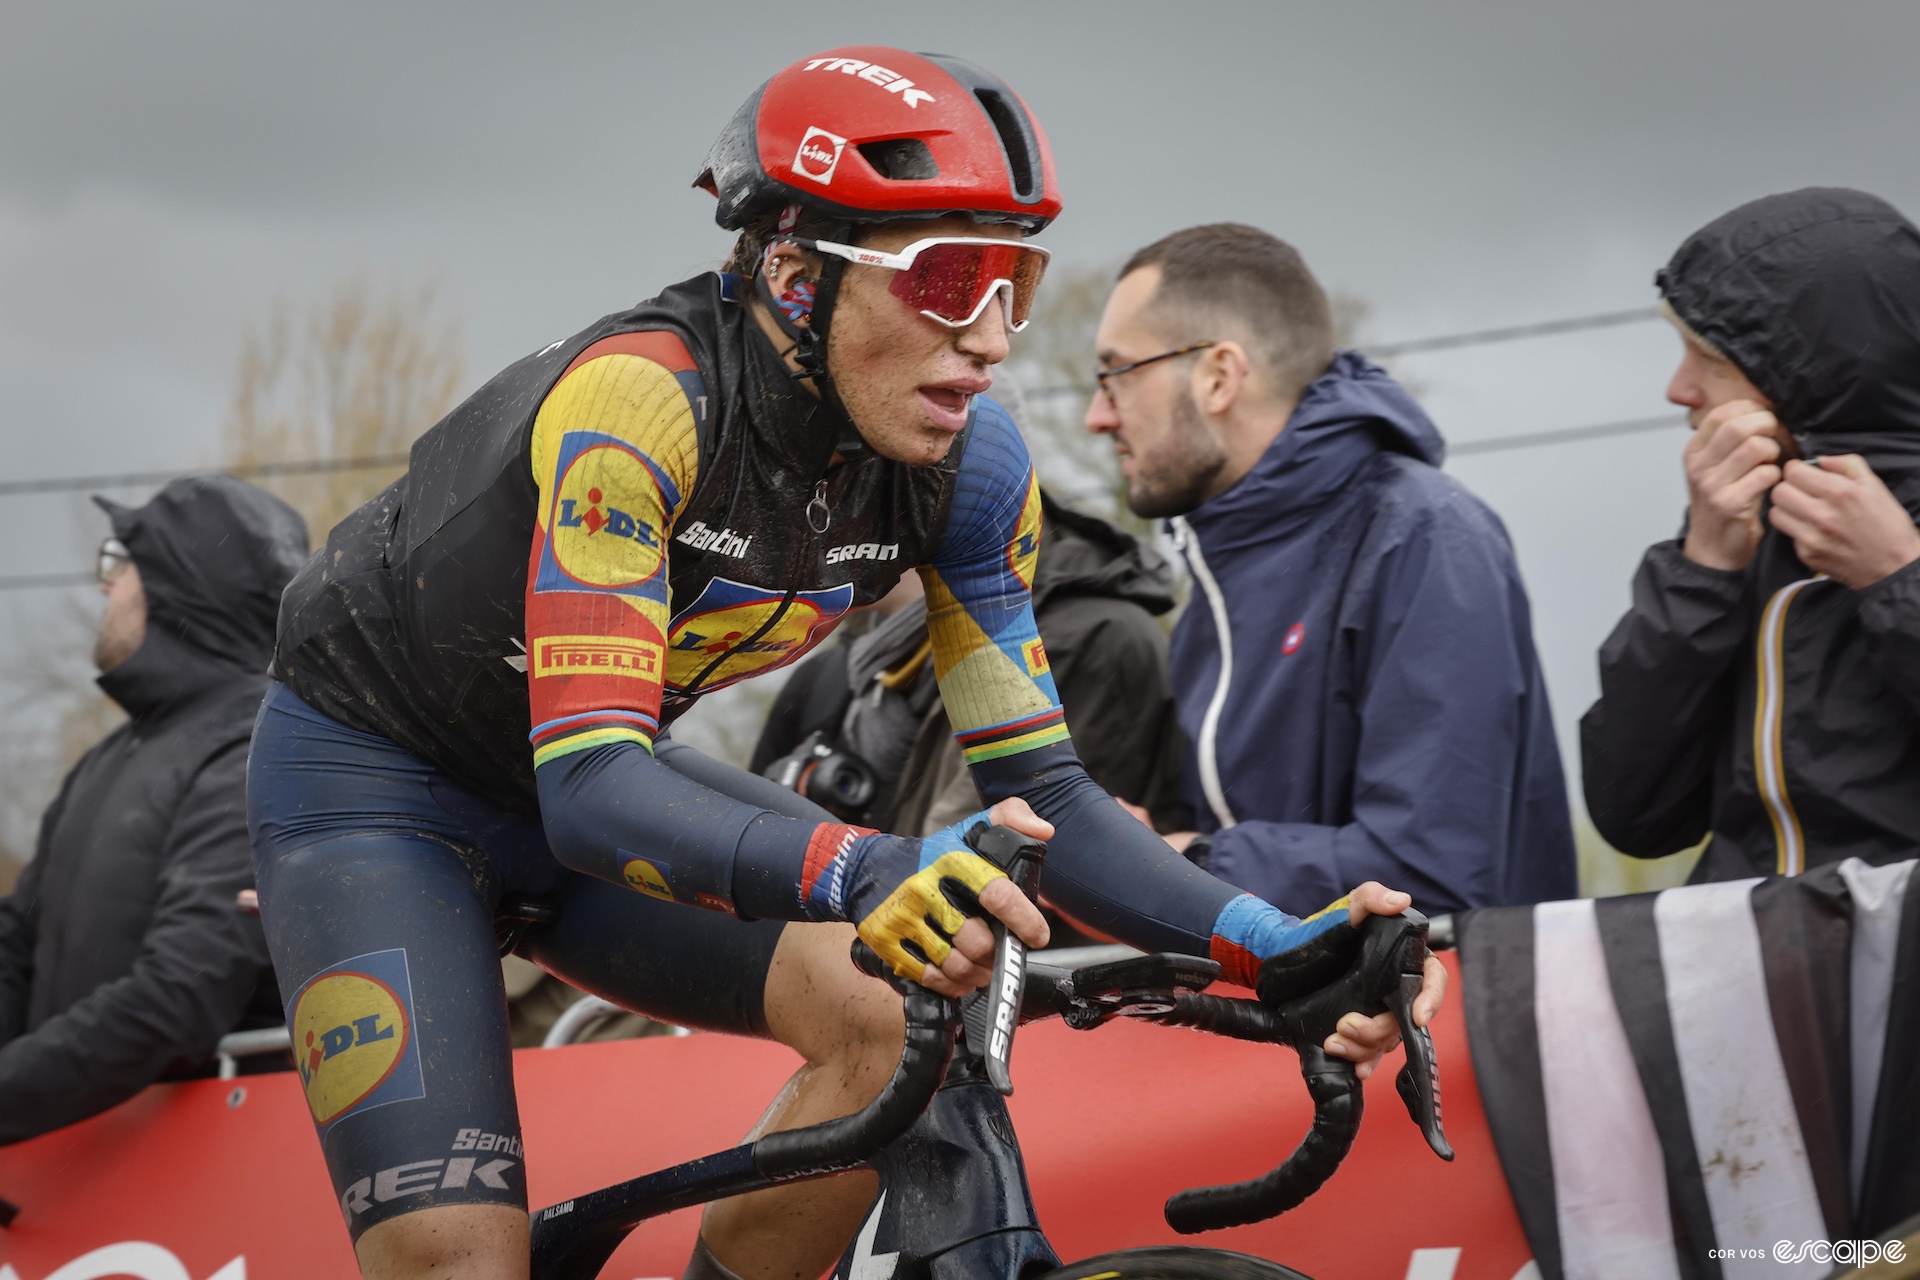 Elisa Balsamo climbs cobbles in the rain at the Tour of Flanders.